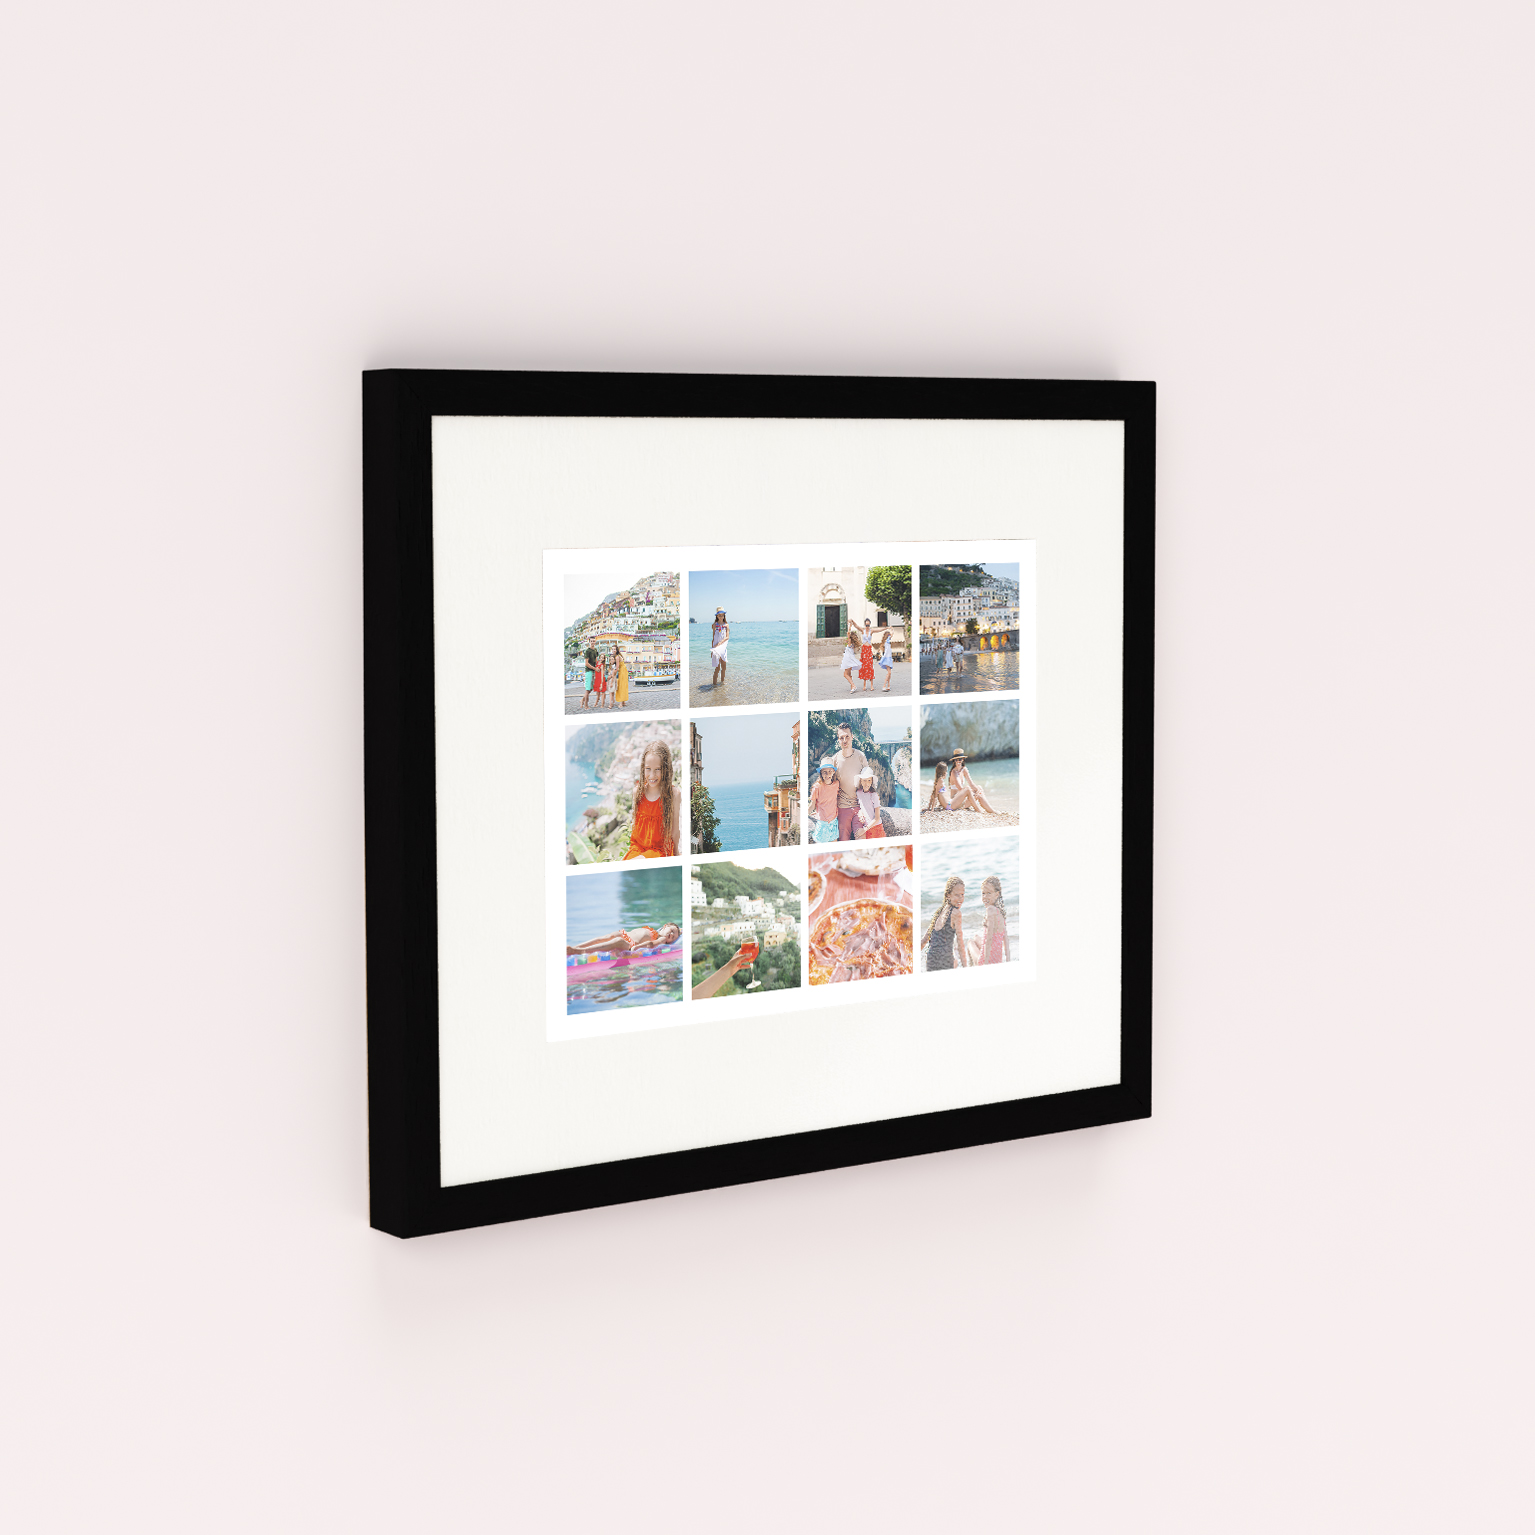 Massive Montage Framed Photo Prints - Offer an extraordinary way to display memories with this curated collage of 10+ photos, elegantly mounted in a cream frame. Personalize each print to tell your unique story, creating a one-of-a-kind piece that reflects your taste and experiences. Cherish your special moments with this perfect showcase of memories.